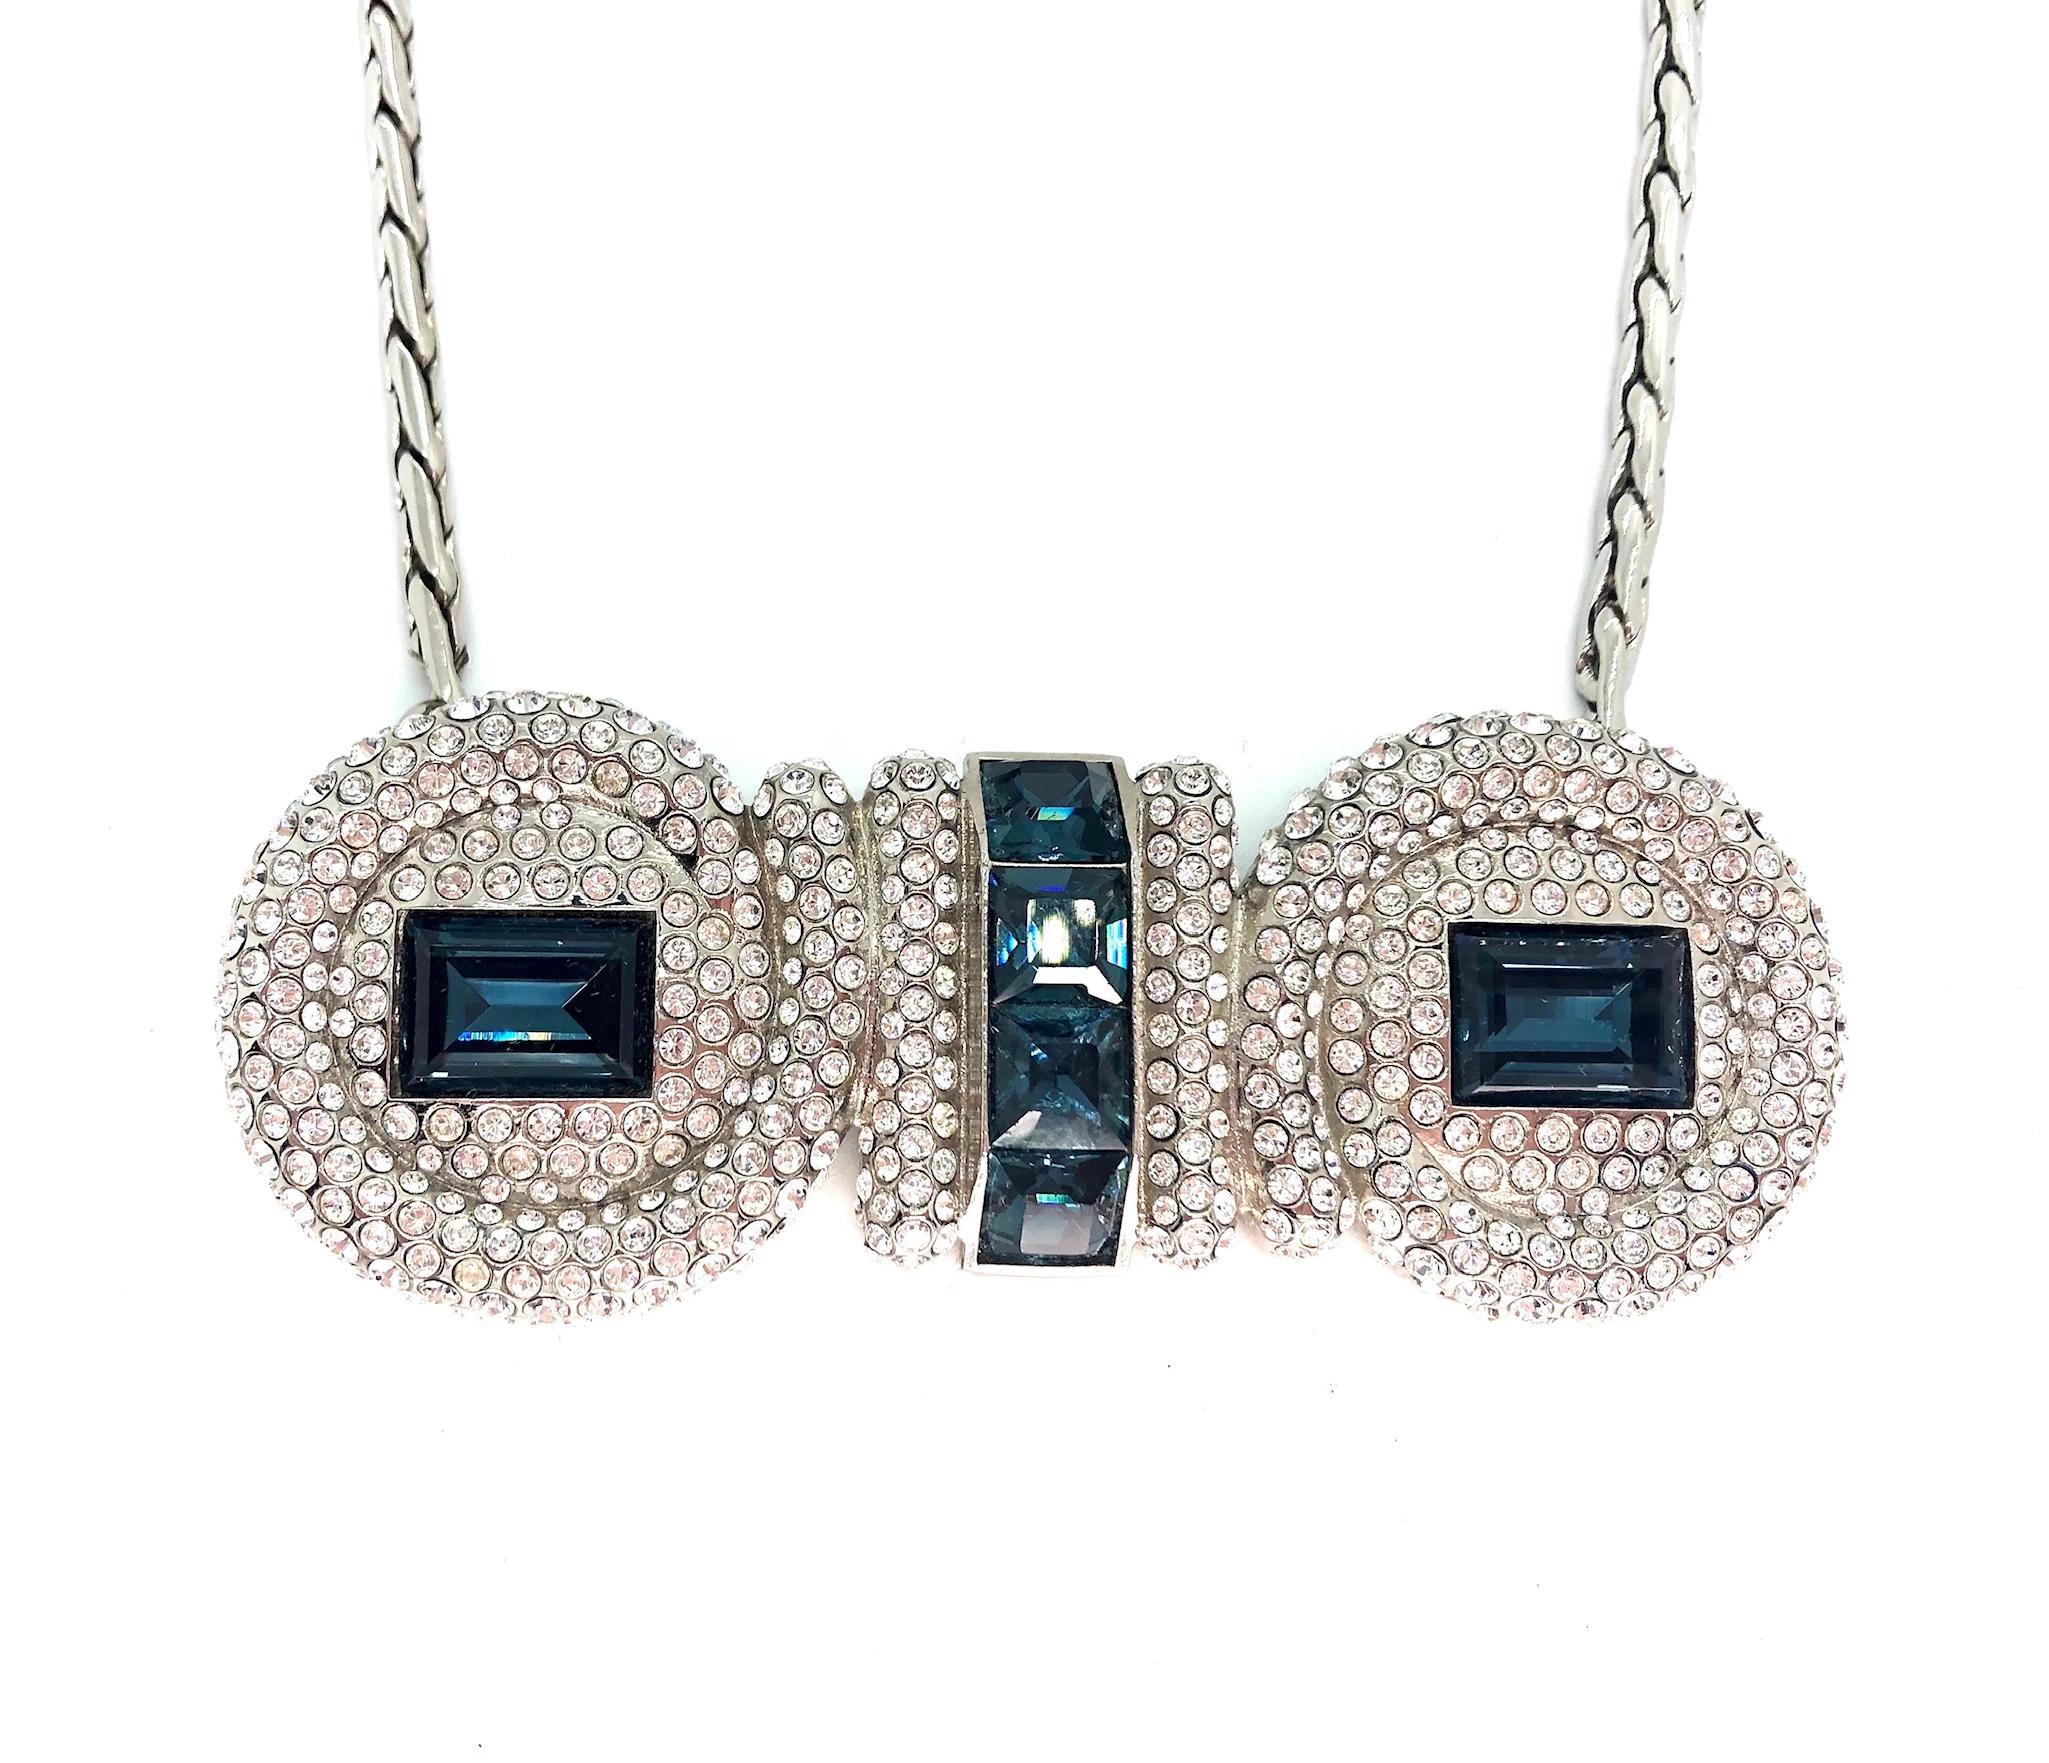 Karl Lagerfeld Swarovski Atelier Vintage Statement Necklace 

Silver plated with crystals and blue stones. Short Necklace designed to sit on collar bone. 

Comes with original dustbag and box.

\ Length of chain - 44 cm / 17.32 inches - 130 g,